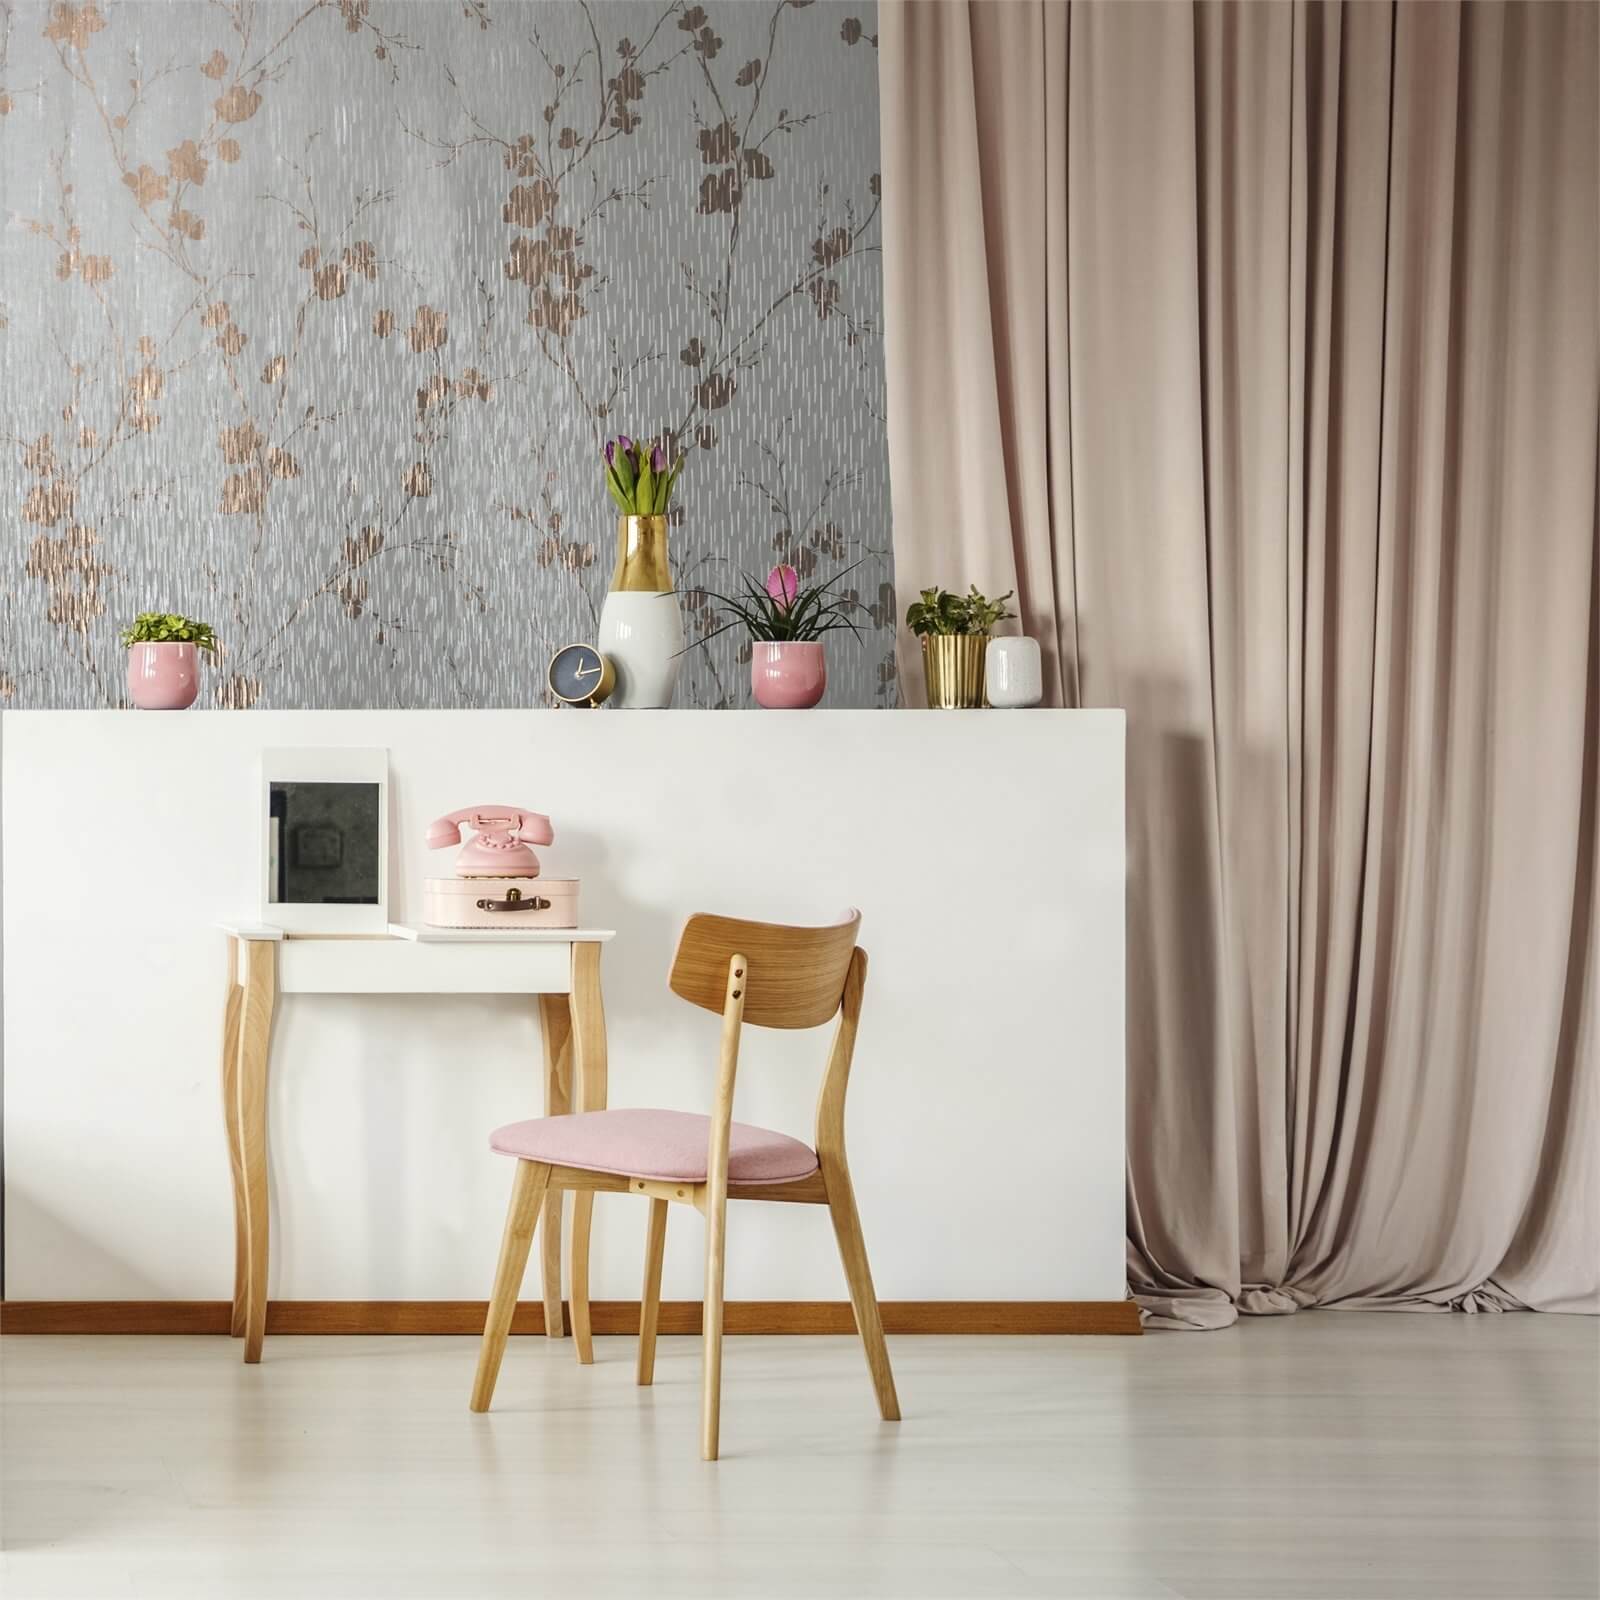 Sublime Theia Blossom Mist & Rose Gold Wallpaper